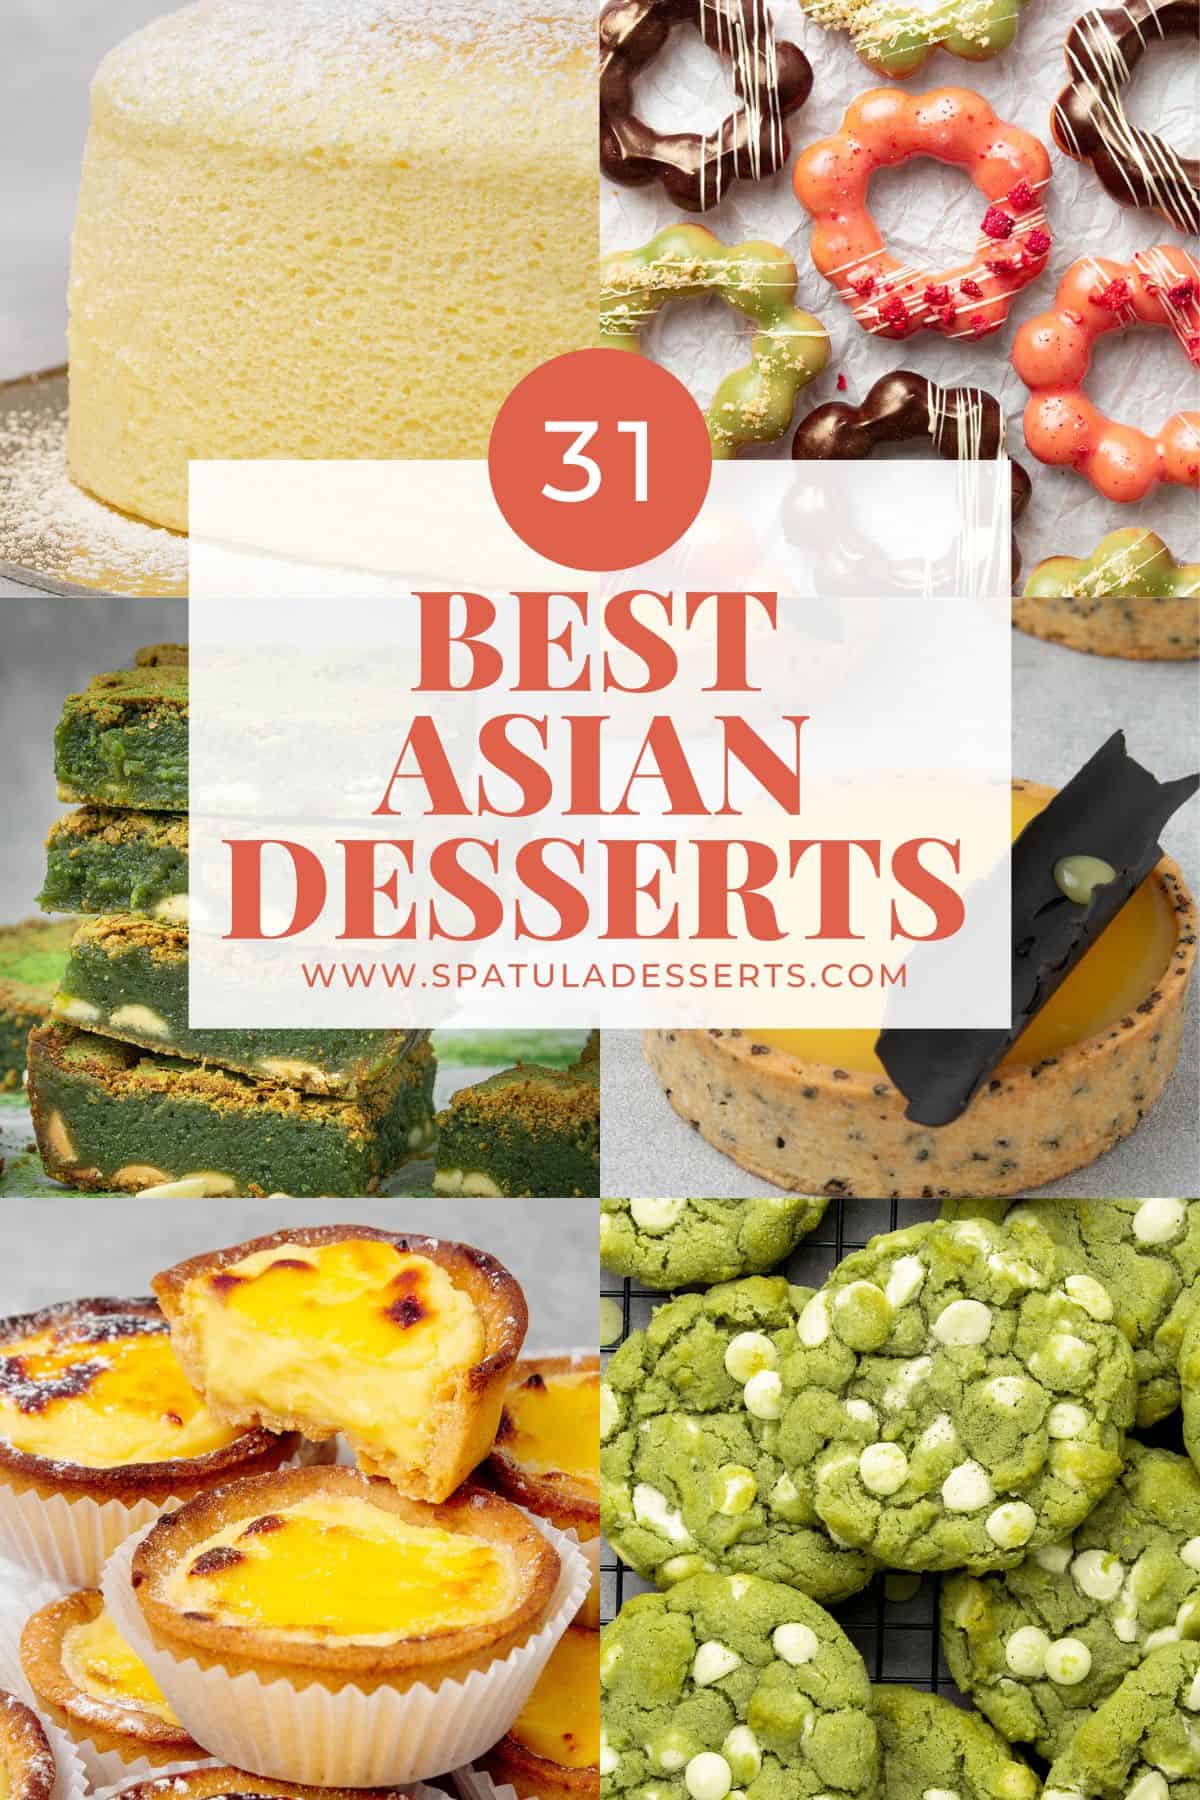 Best Asian Desserts recipe collection.